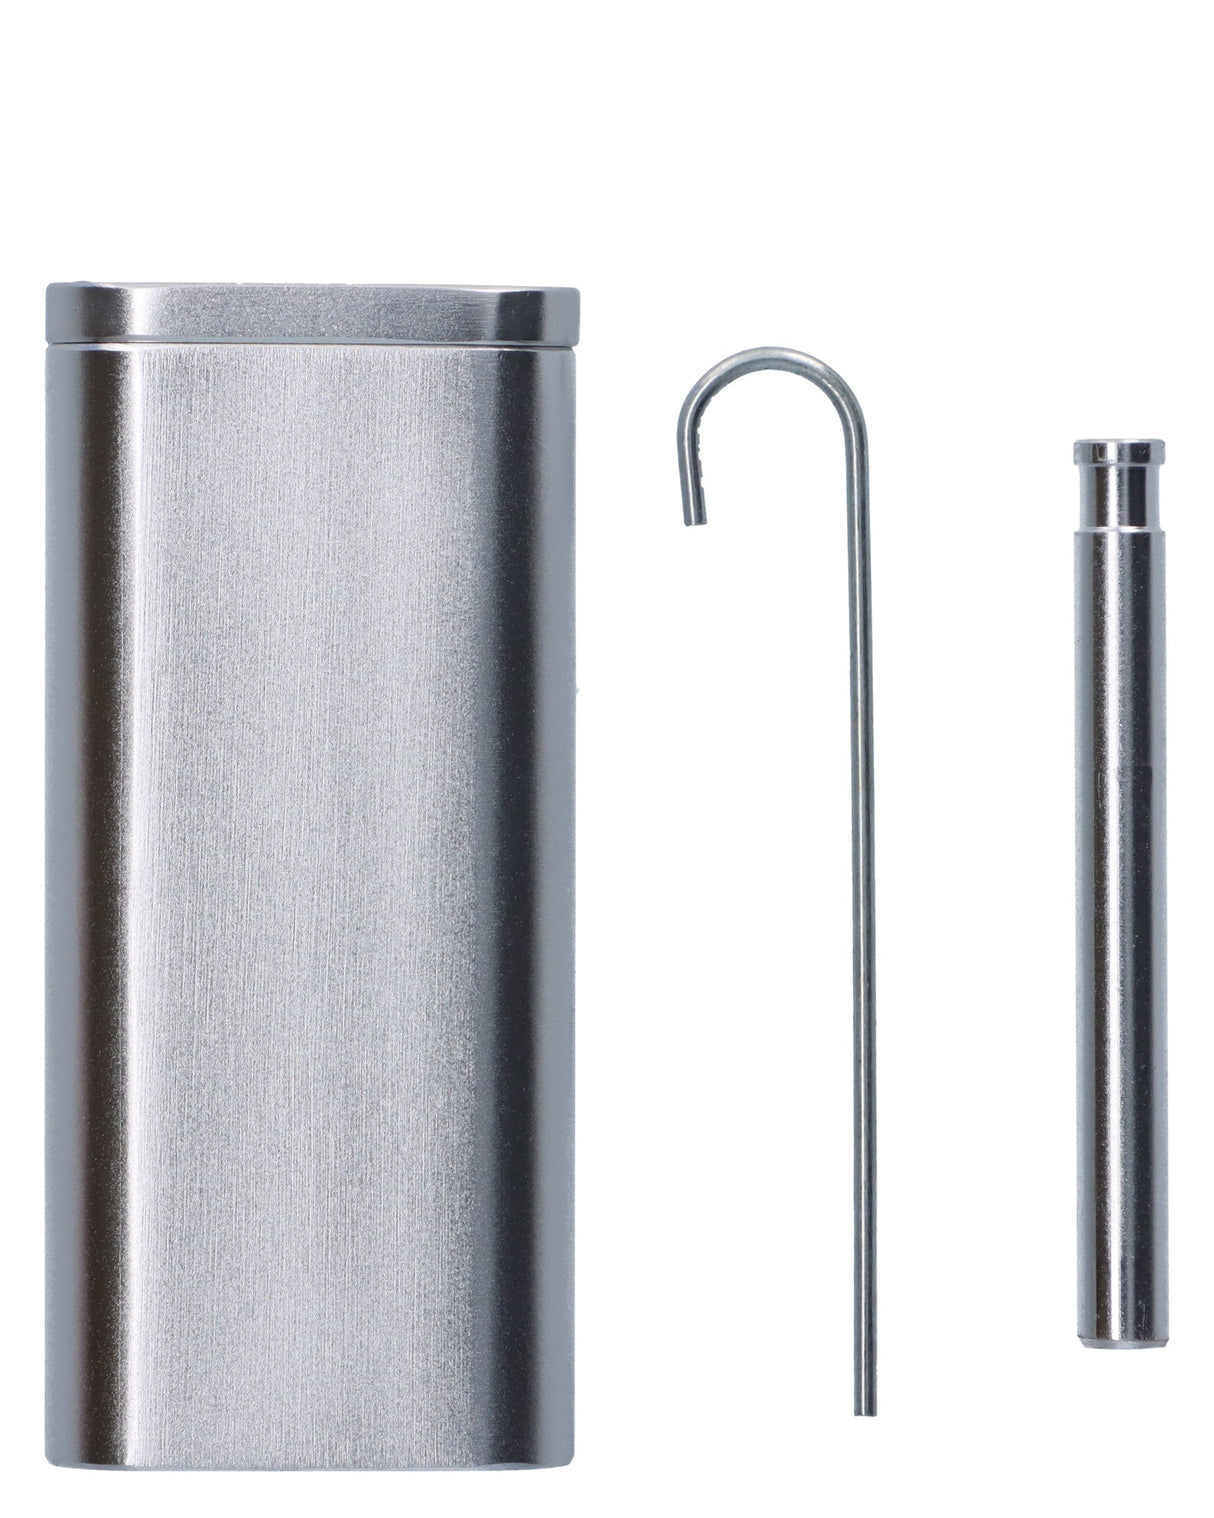 Valiant Distribution Pocket-sized Silver Dugout with One-Hitter, Metal, Portable Design